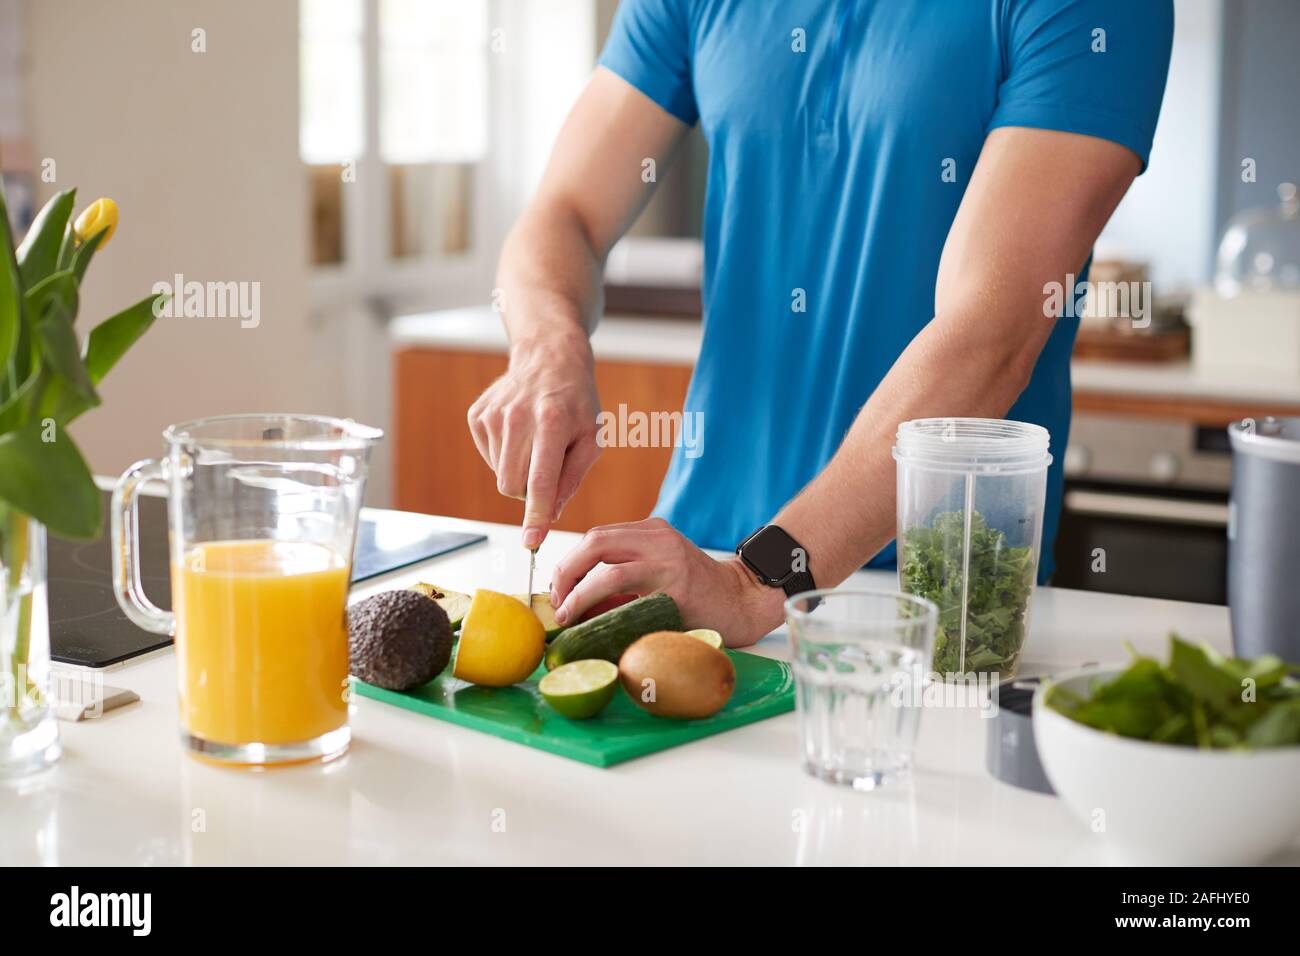 Close Up Of Man Preparing Ingredients For Healthy Juice Drink After Exercise Stock Photo